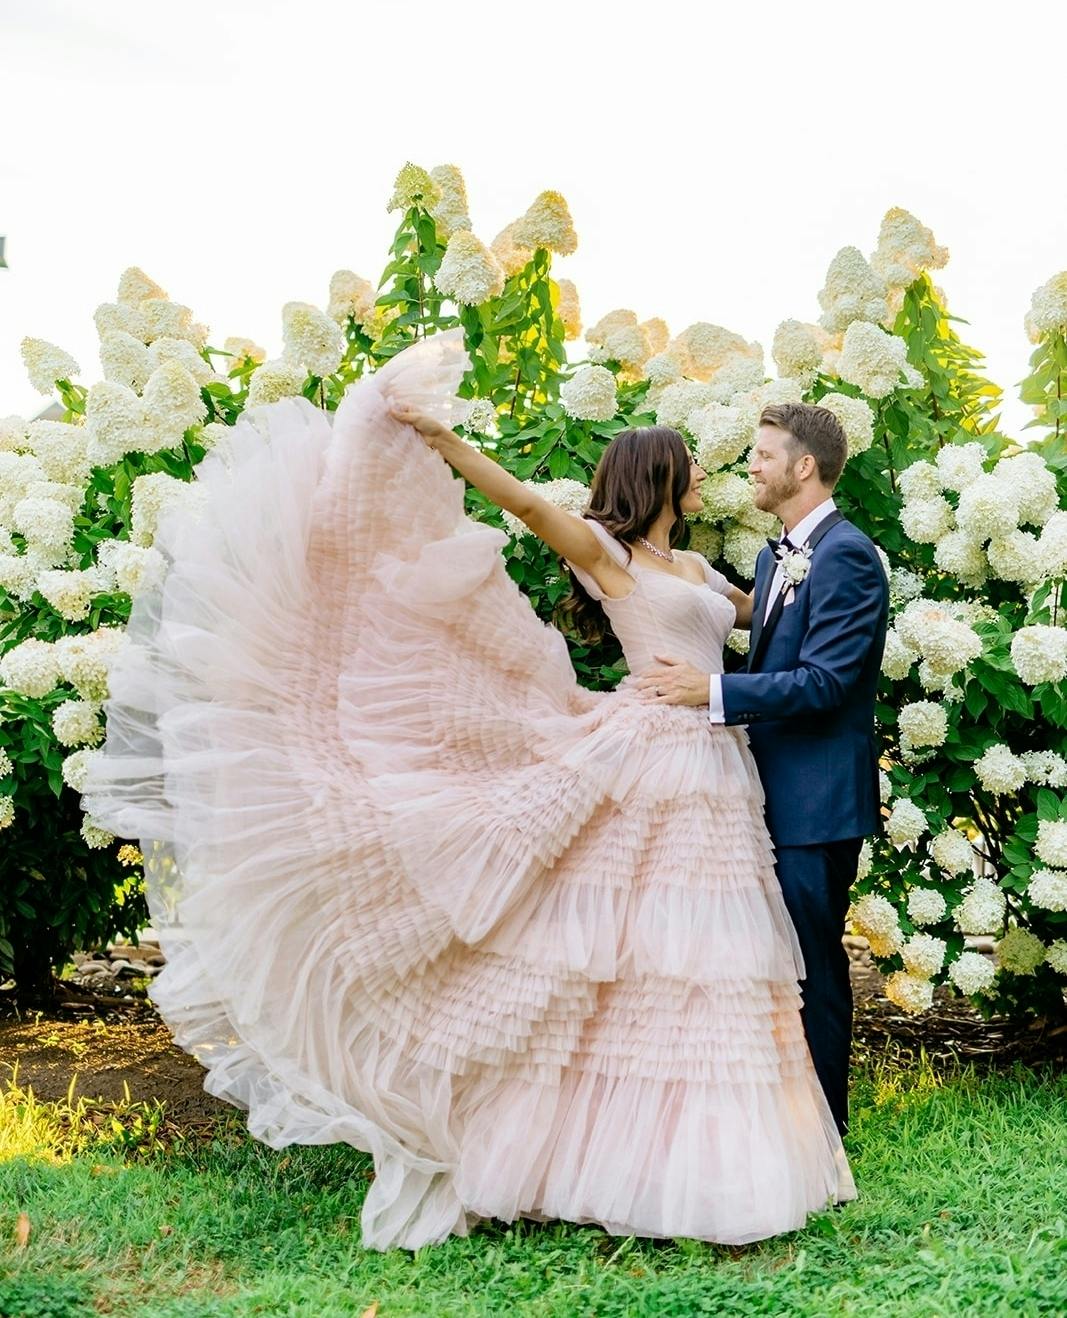 Bride wearing blush wedding gown with layered tulle ruffle layers and ruched bodice and groom wearing navy tuxedo for garden wedding.